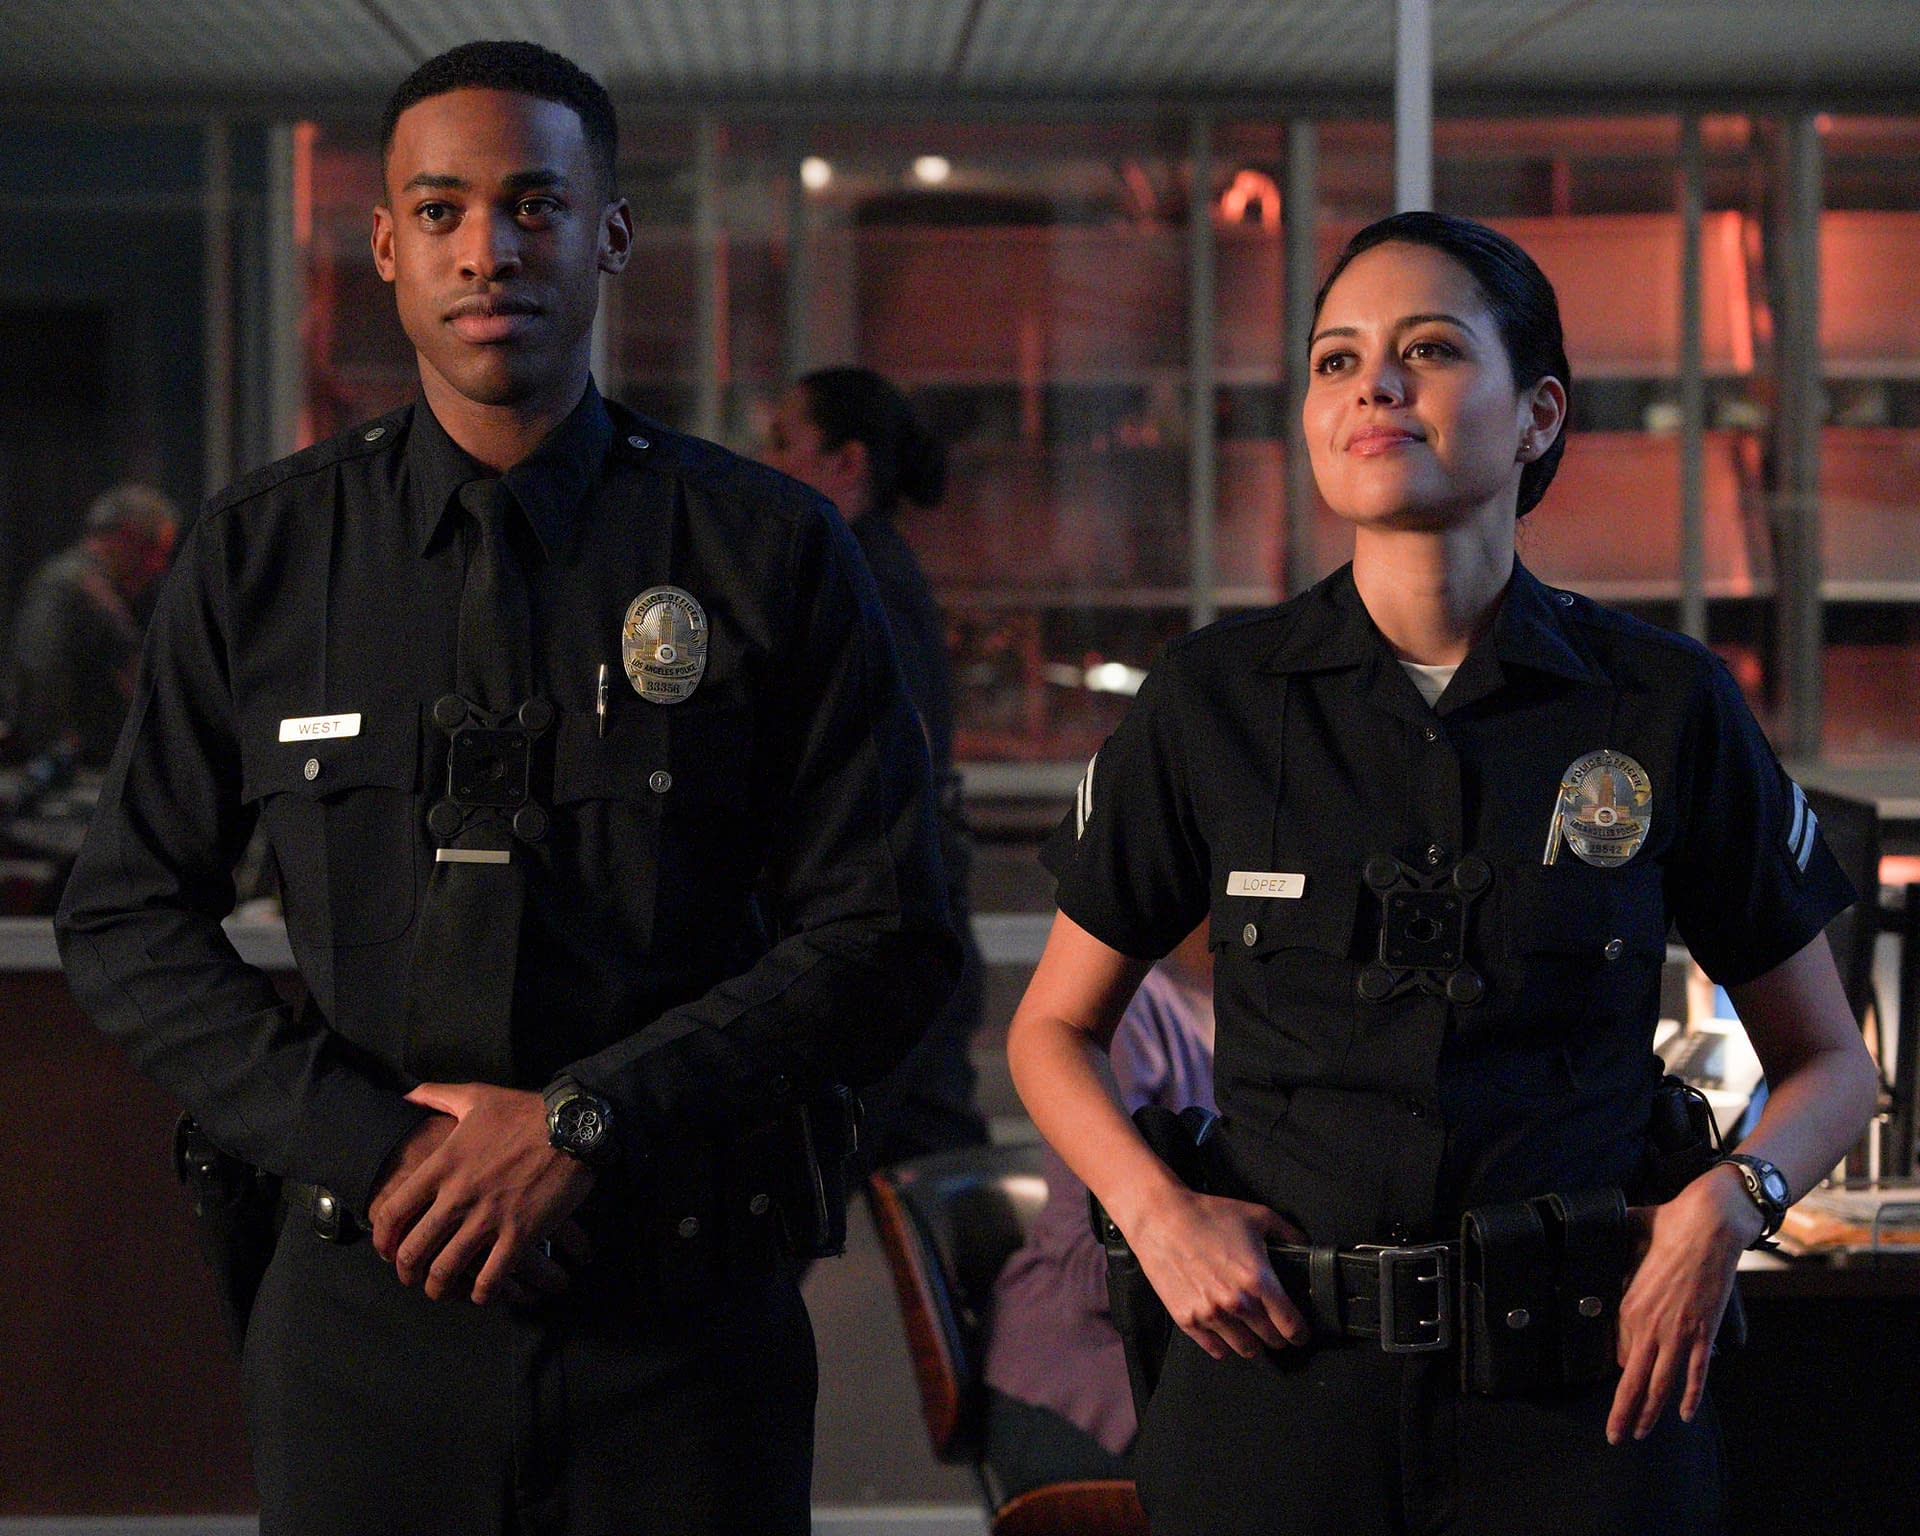 "The Rookie" Season 2 &#8211; "Clean Cut" Finally Finds The Funny [SPOILER REVIEW]